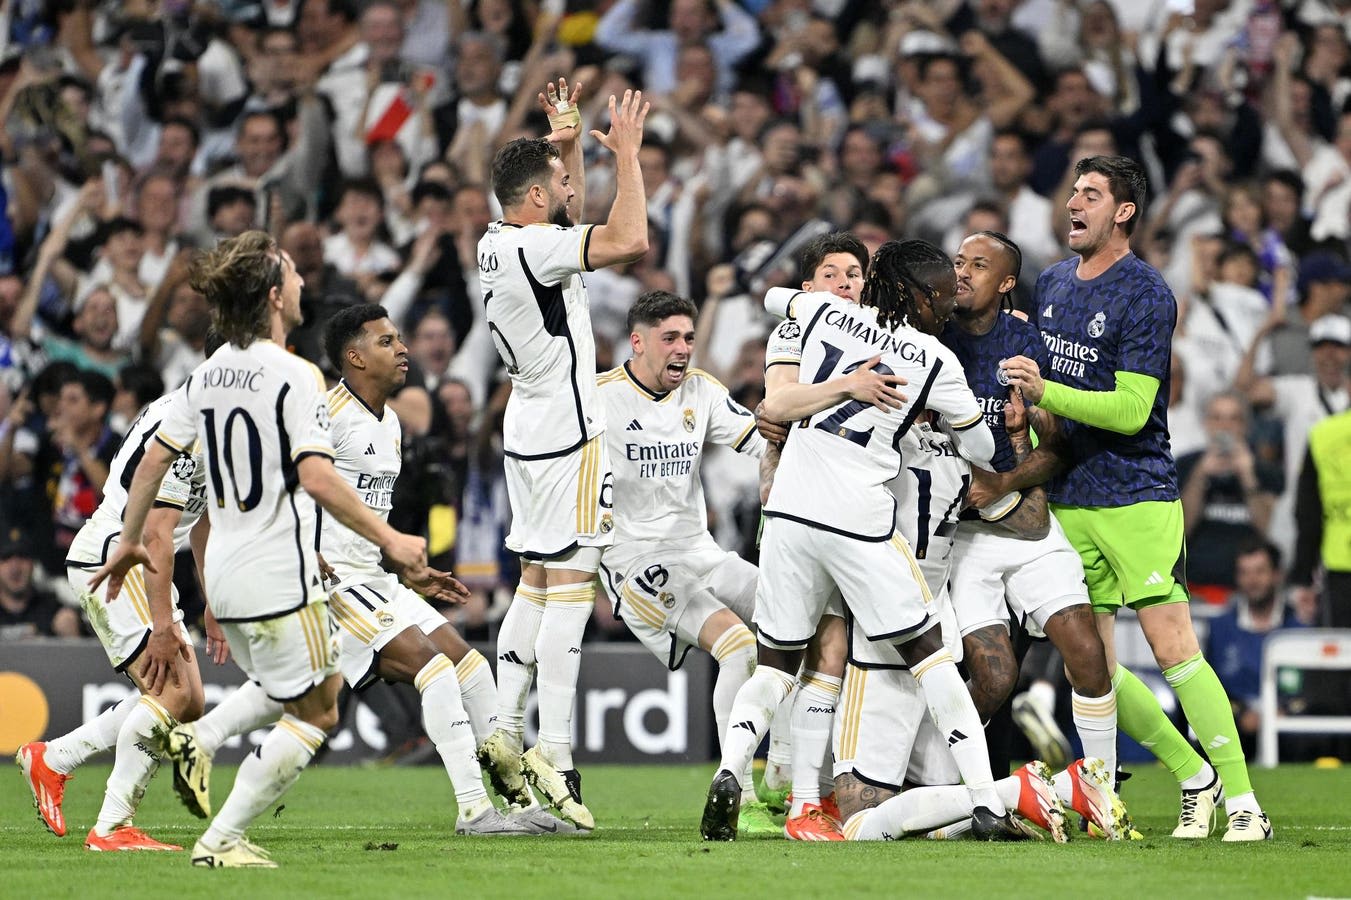 Real Madrid Has Champions League Final Dilemma That Ancelotti Has Solved, Reports Relevo